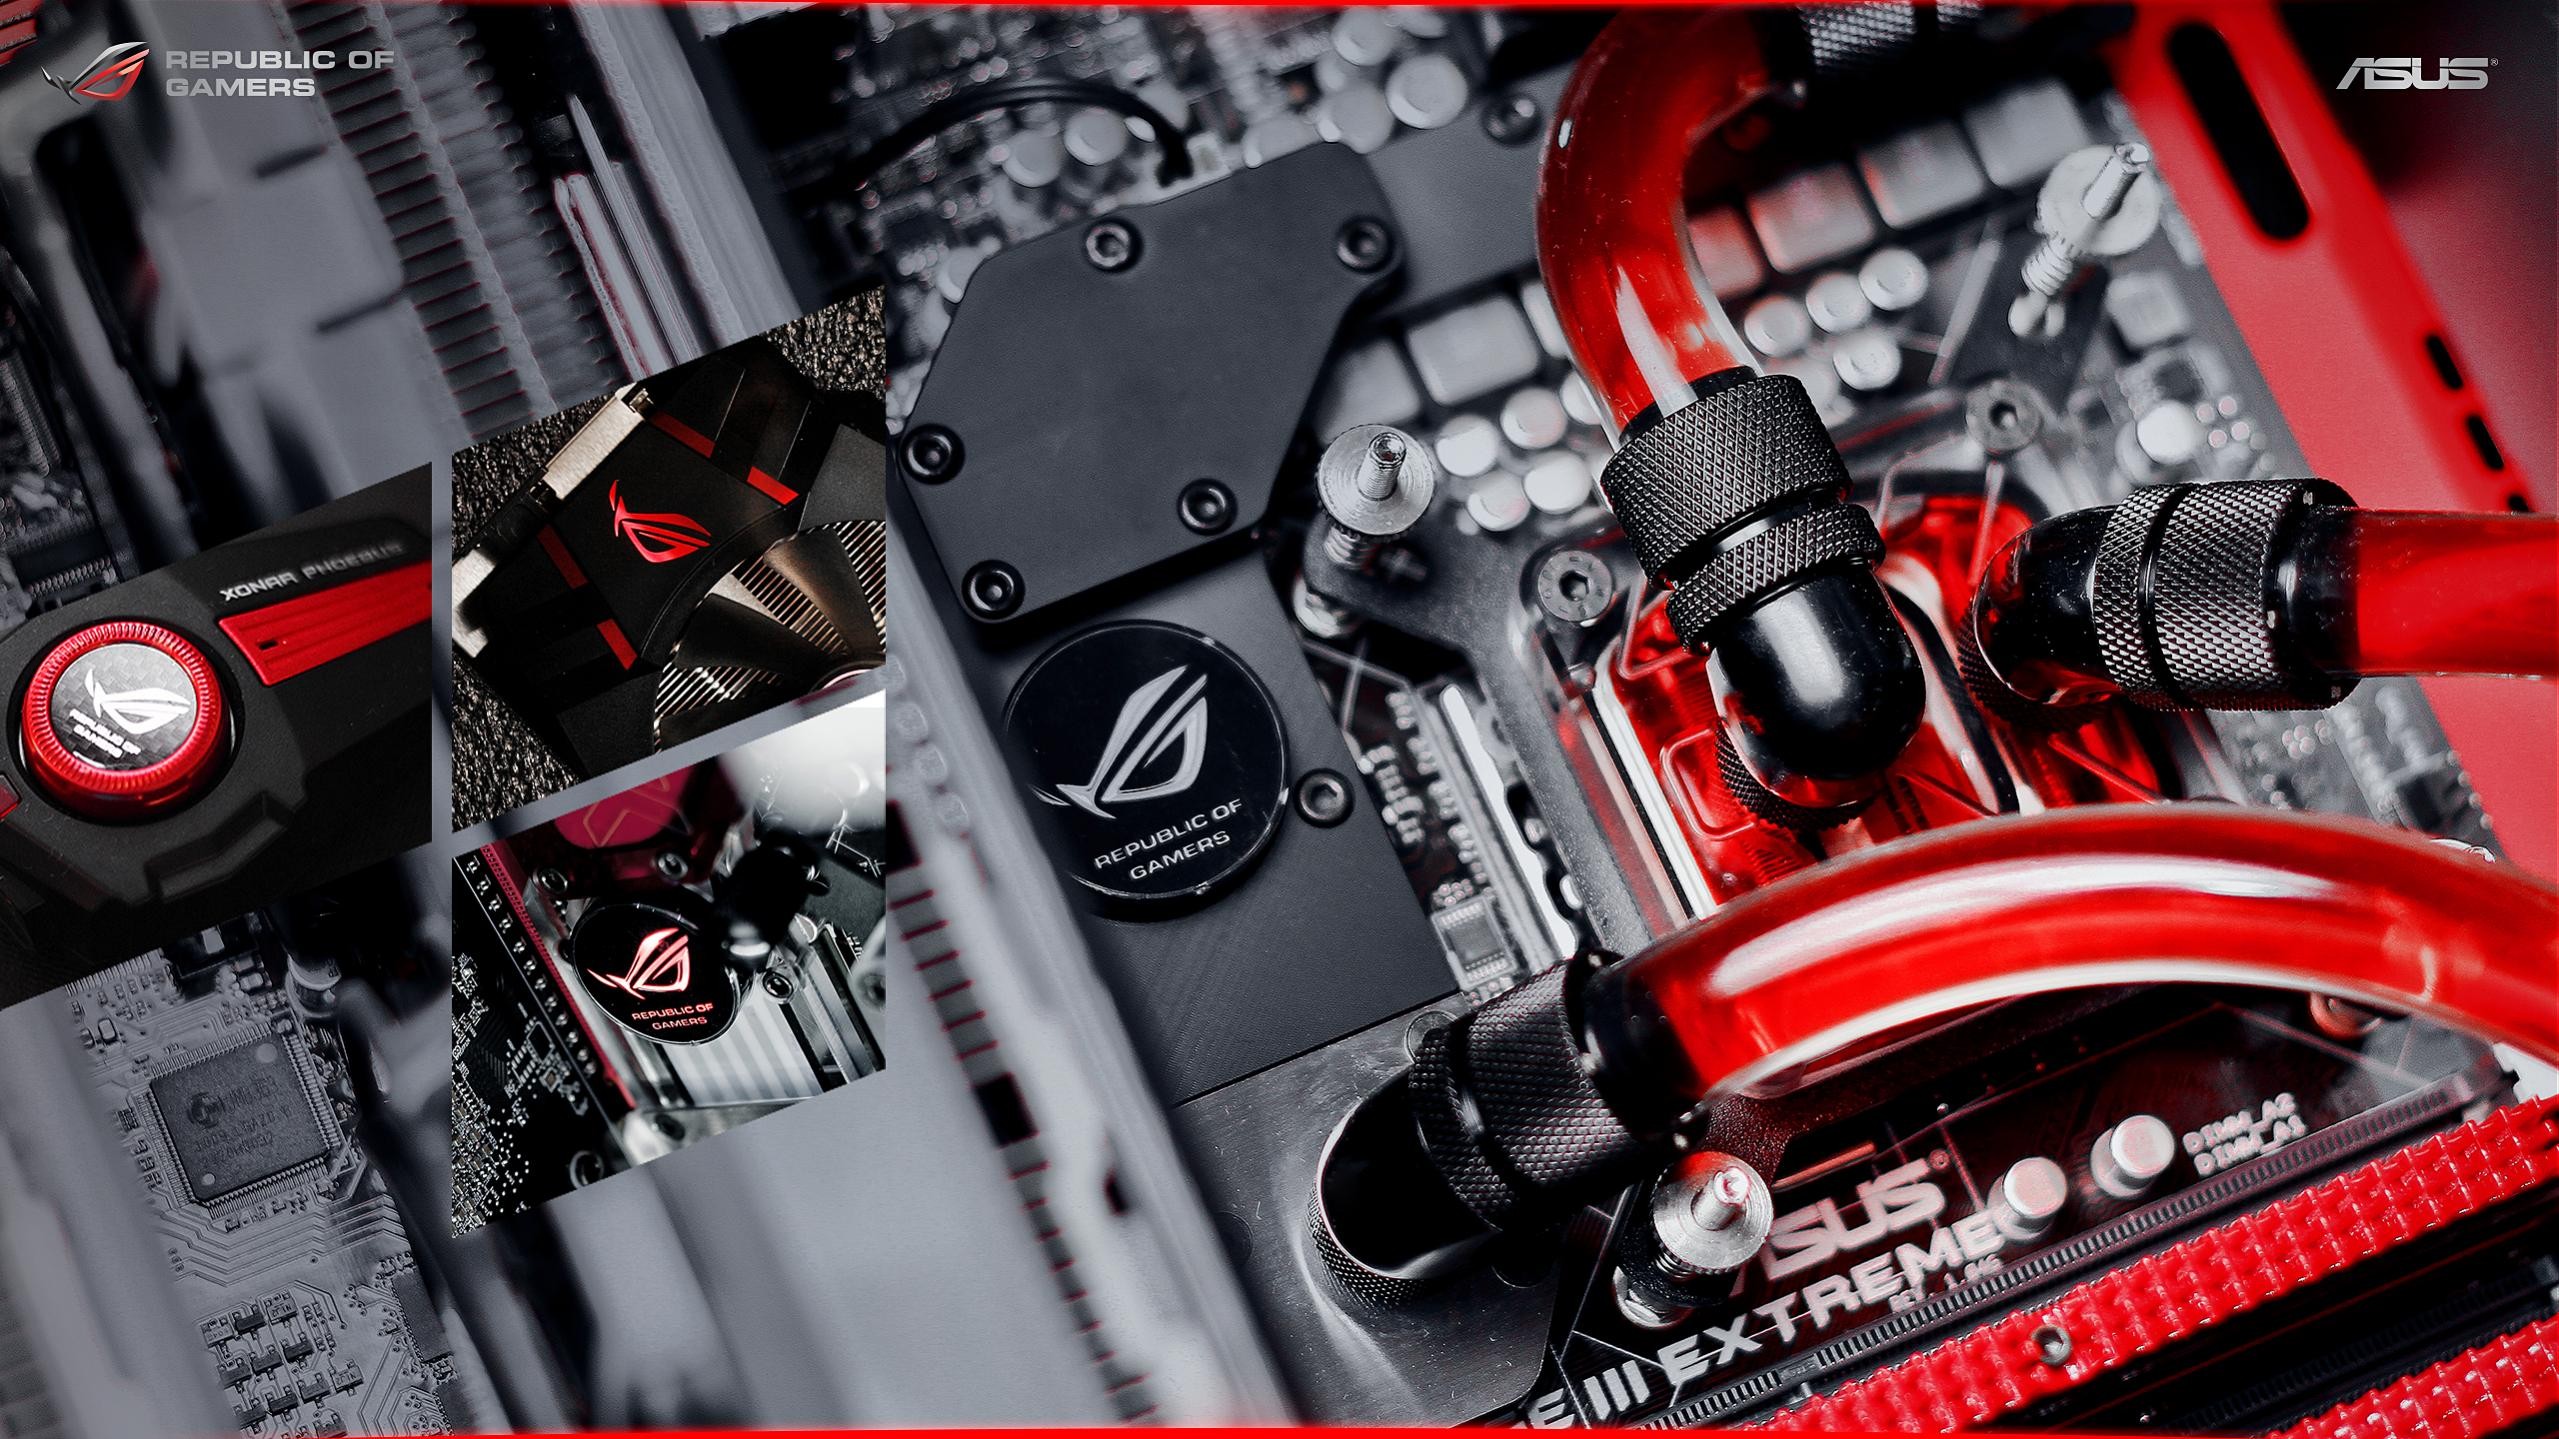 General 2559x1439 Republic of Gamers ASUS motherboards liquid cooling closeup watermarked